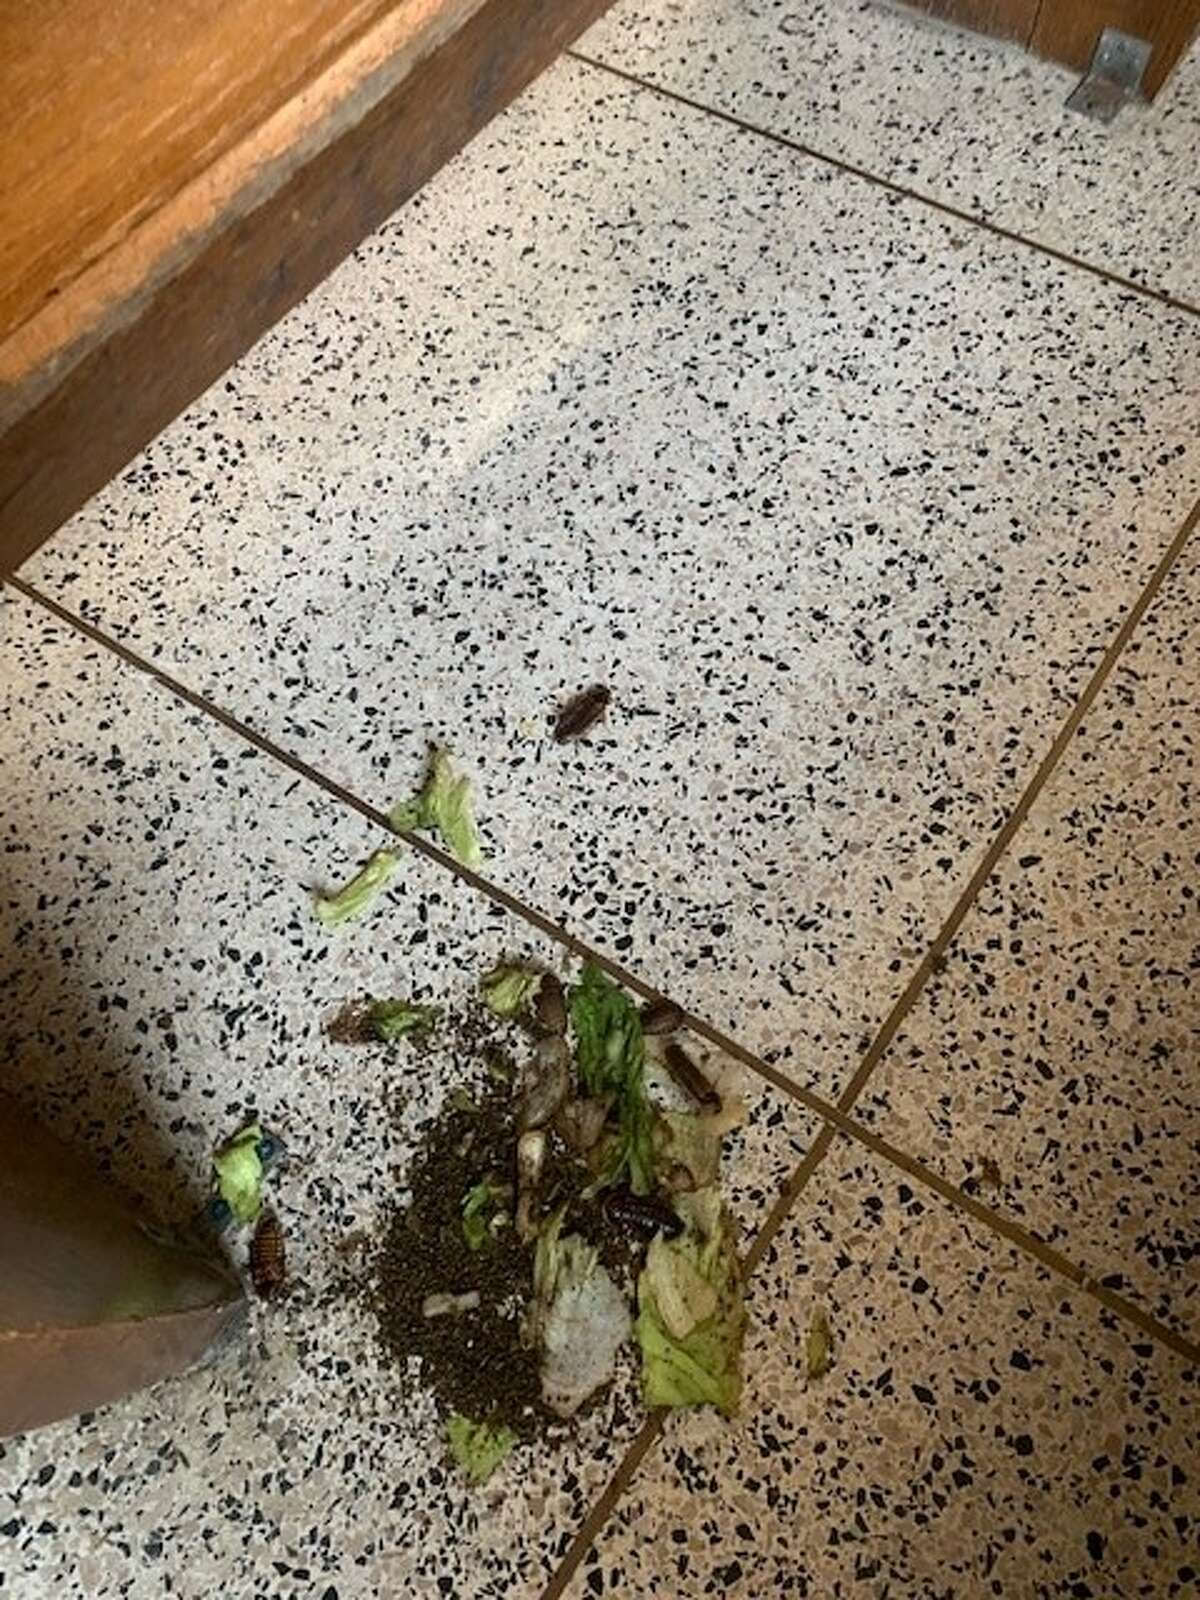 The state Office of Court Administration said this bundle of lettuce, cockroaches and what appears to be dirt or insect bedding was released in Albany City Court June 7, 2022.